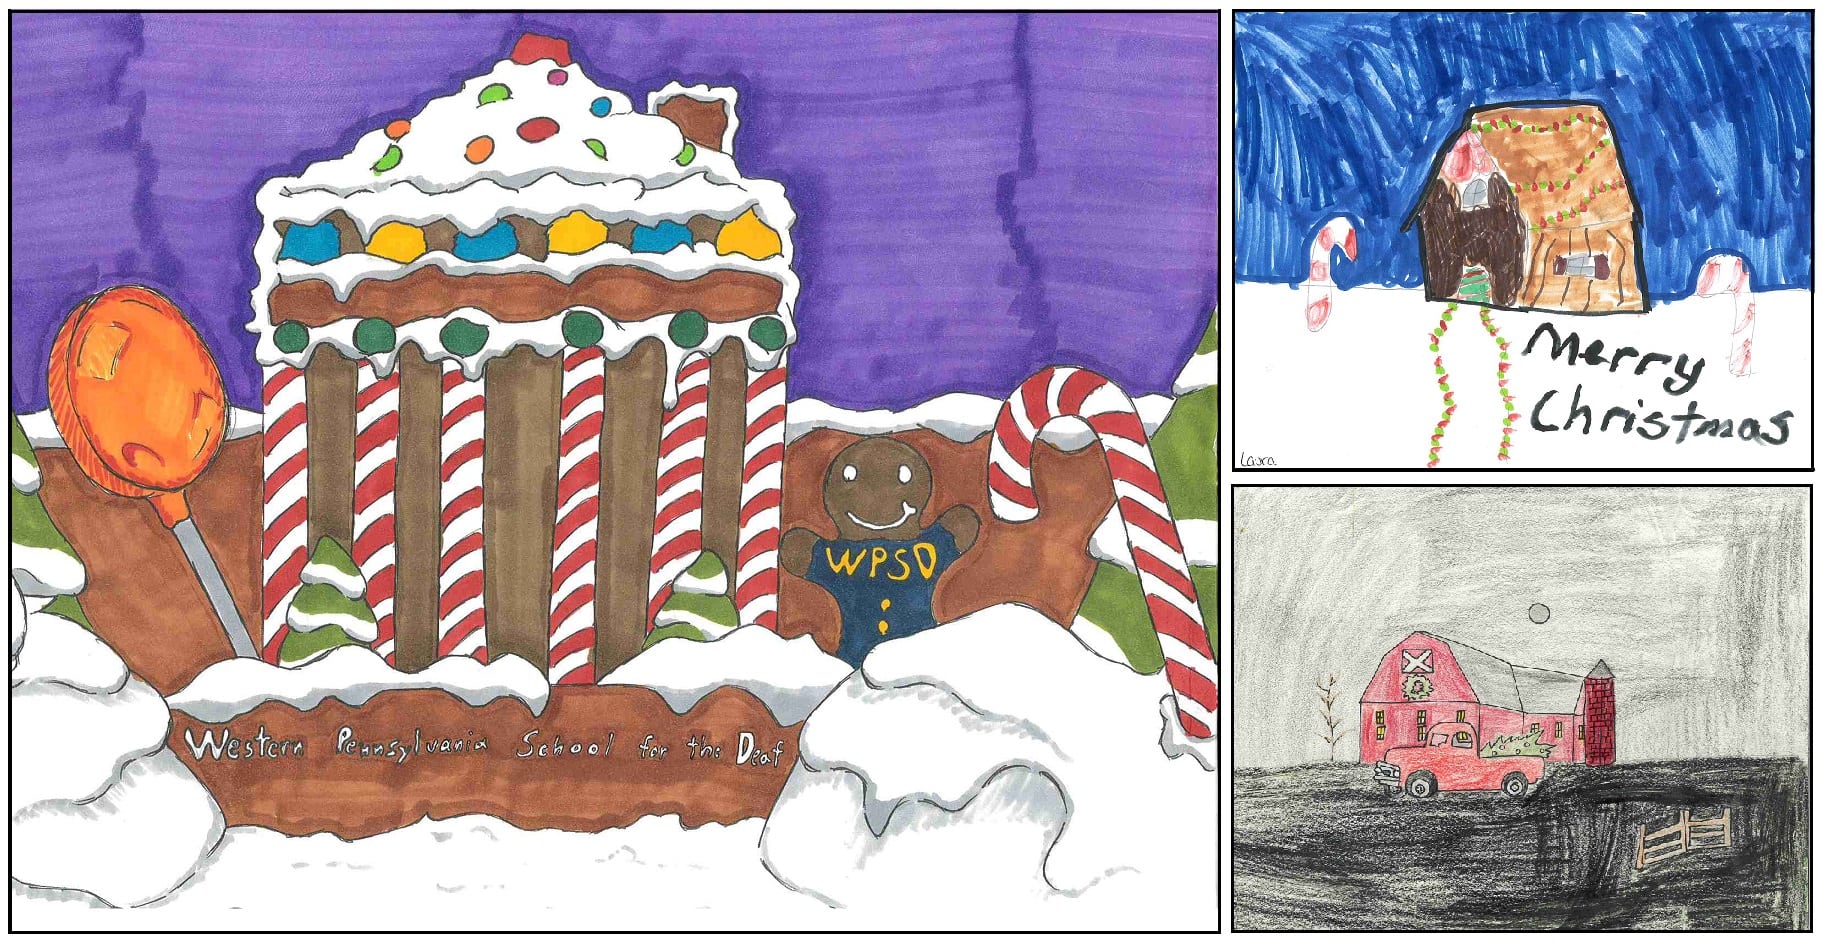 Students holiday artwork showing winter scenes, including a gingerbread house and the exterior of the Western Pennsylvania School for the Deaf